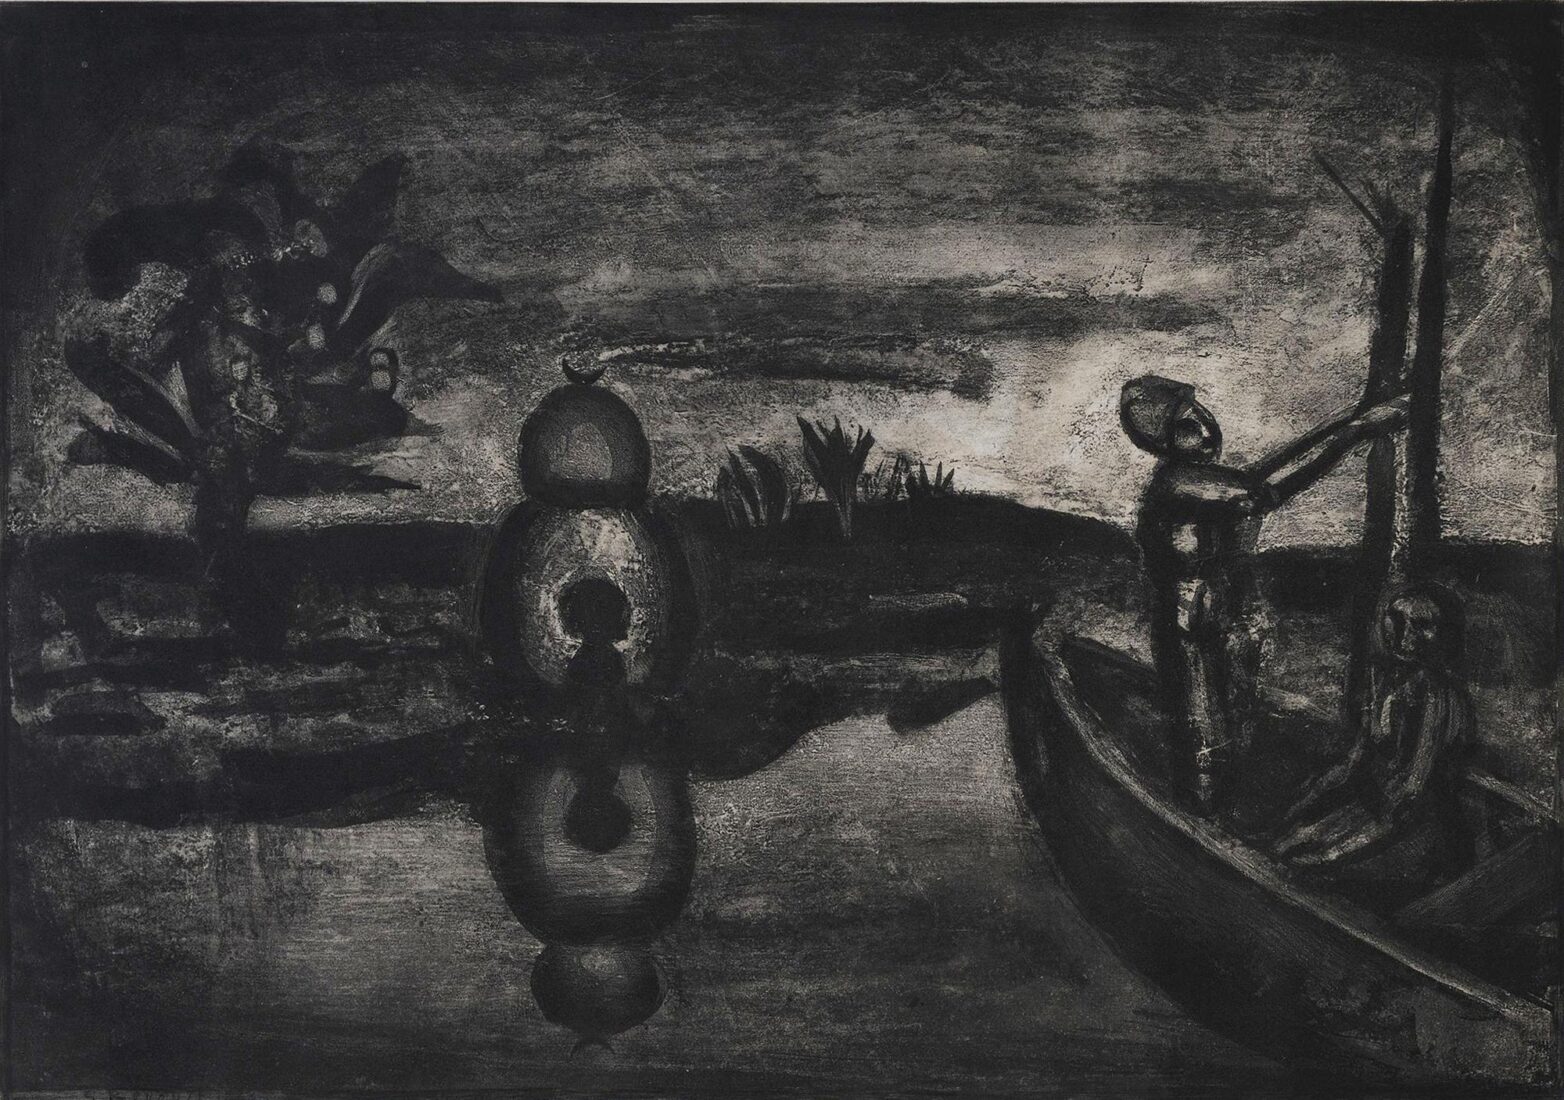 “In the land of thirst and fear” - Rouault Georges